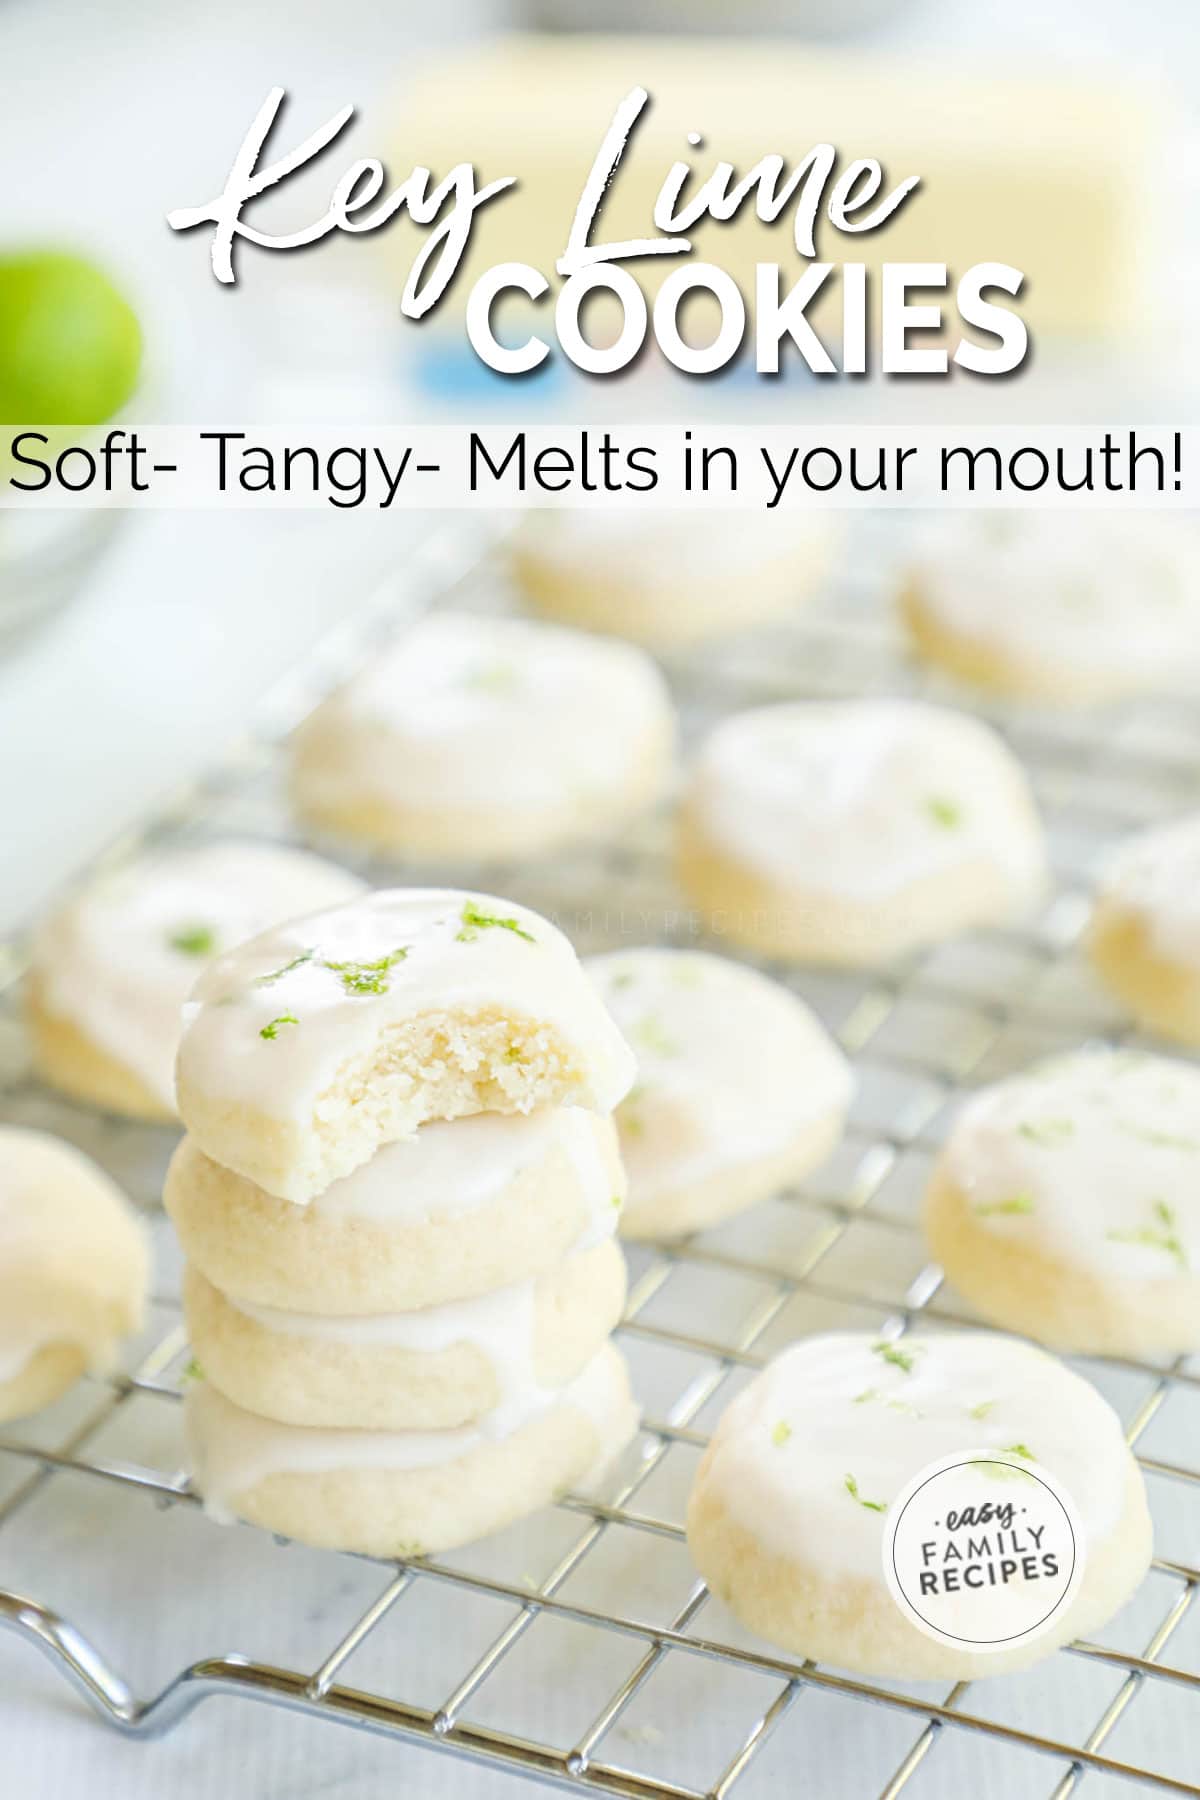 Glazed Key Lime Cookies stacked up in a pile.